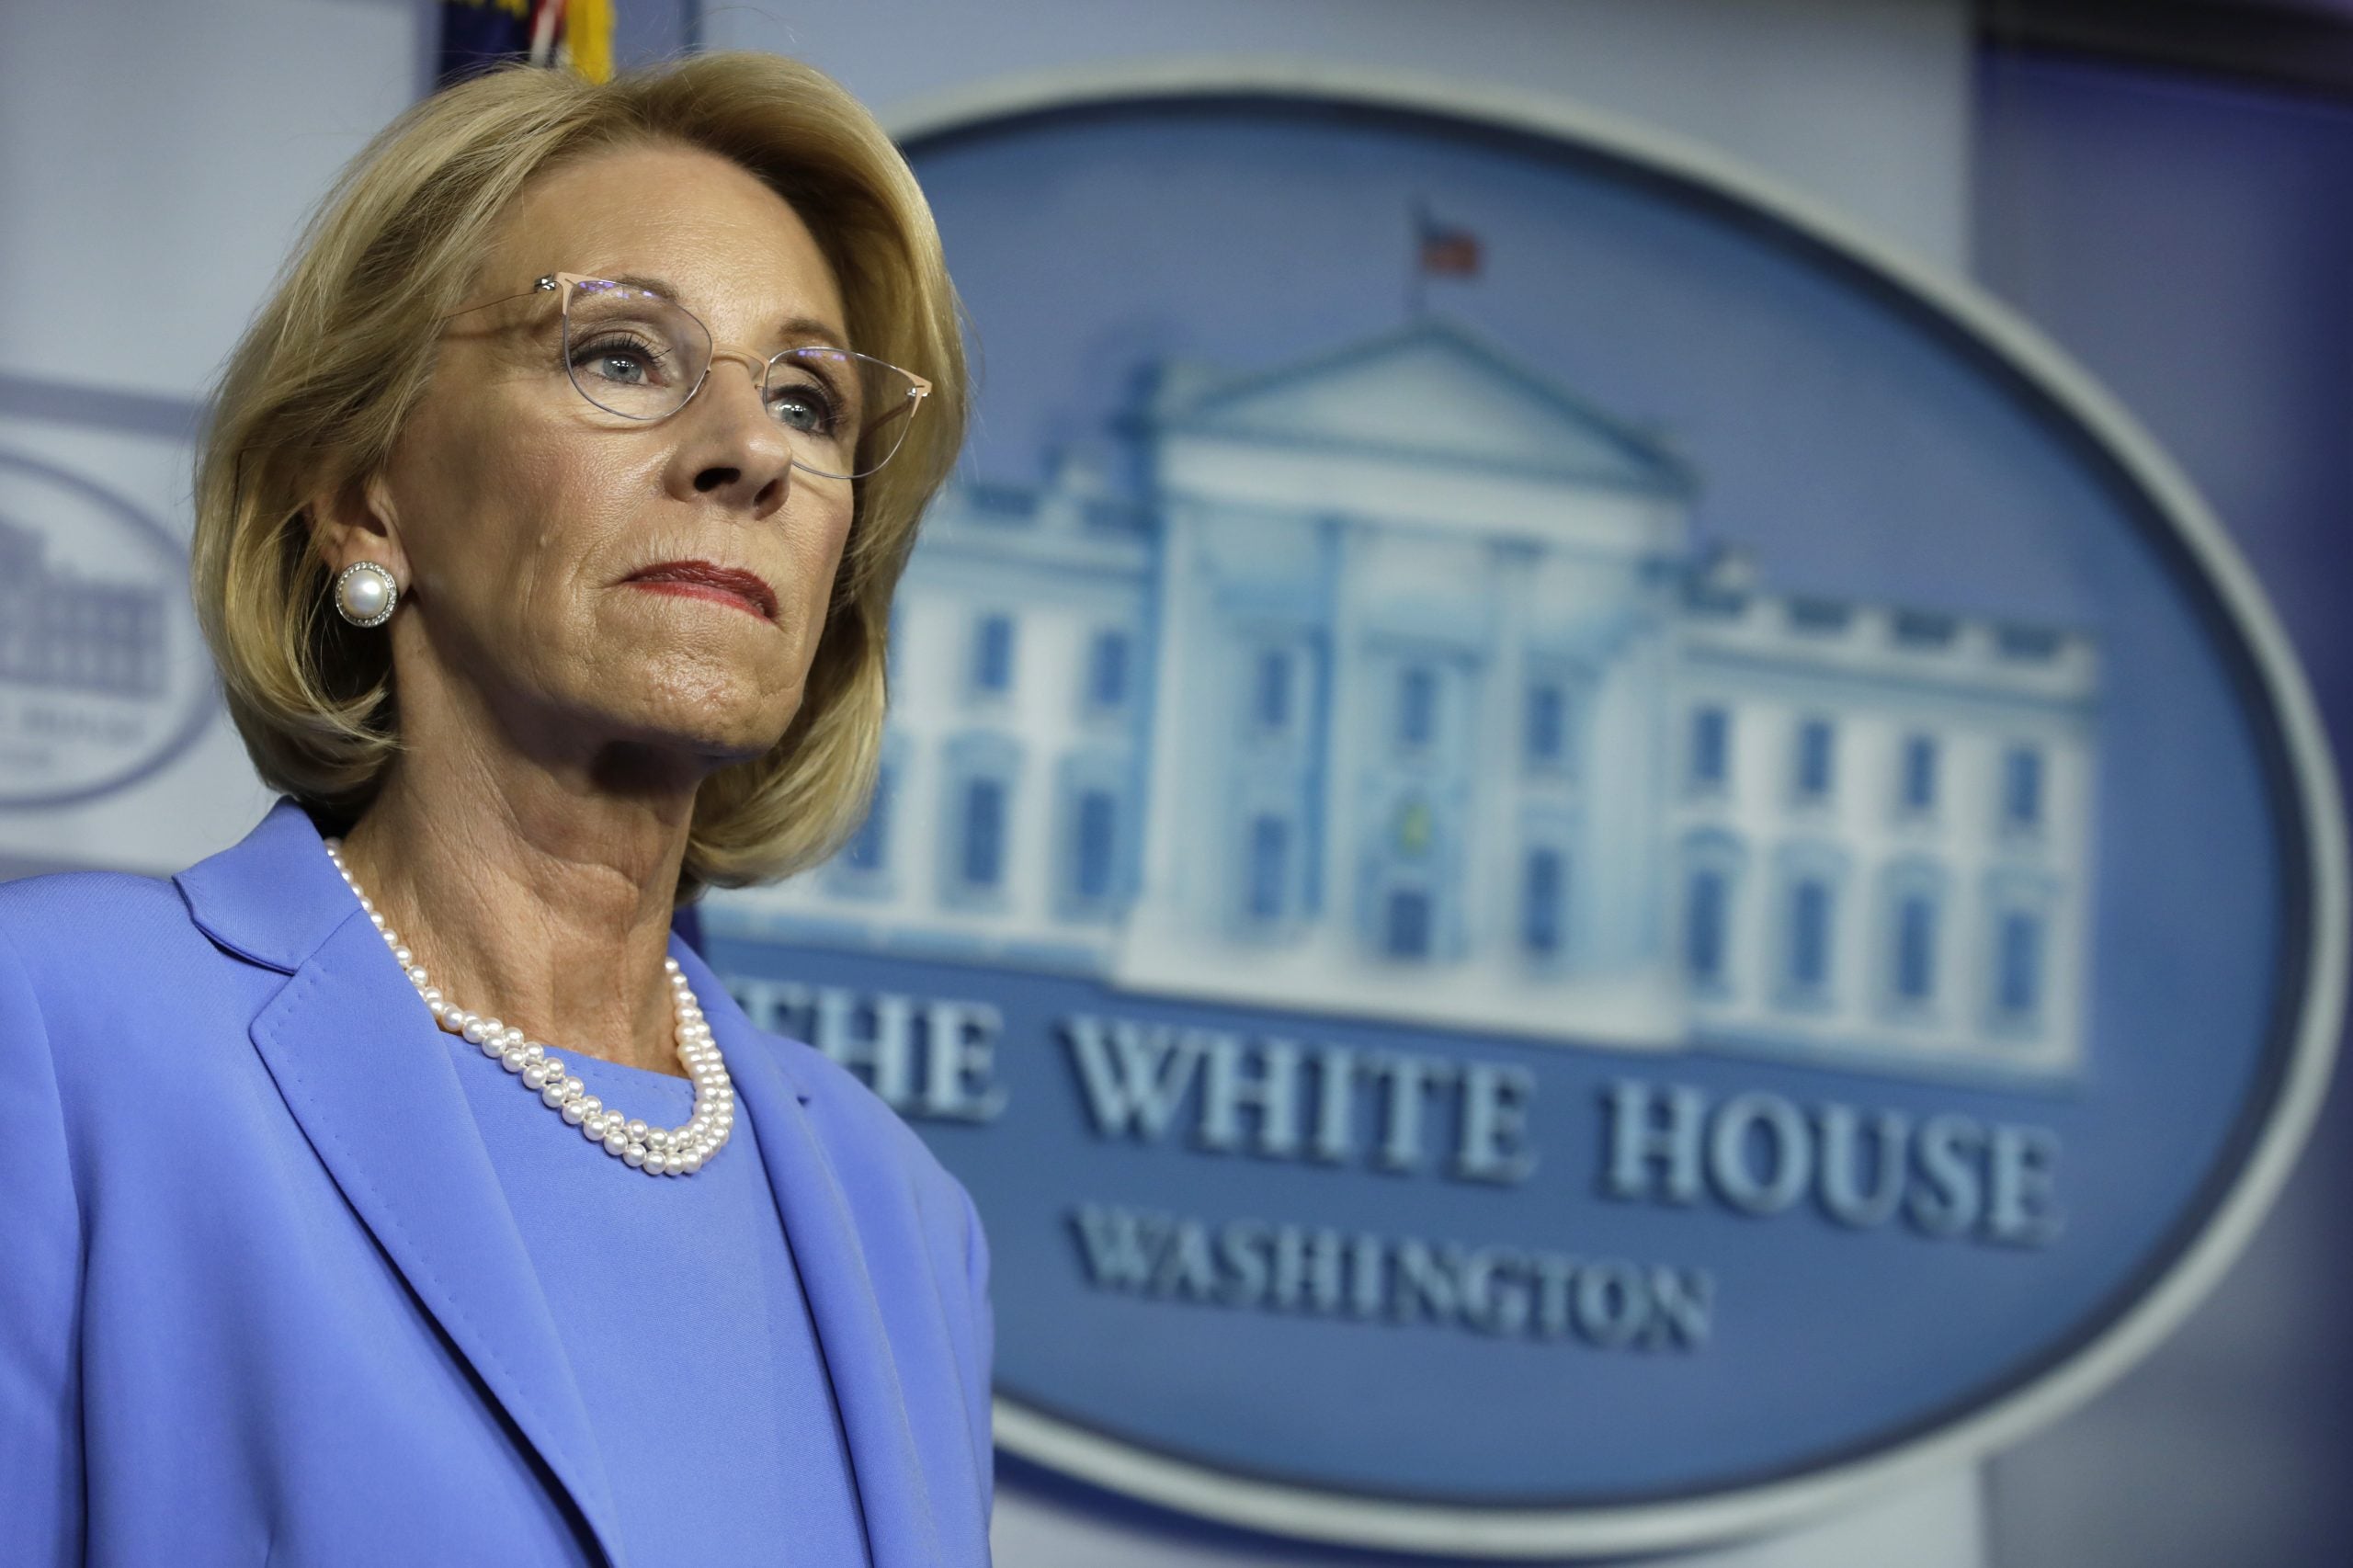 Trump’s Education Secretary Calls For The Dissolution Of The Department Of Education